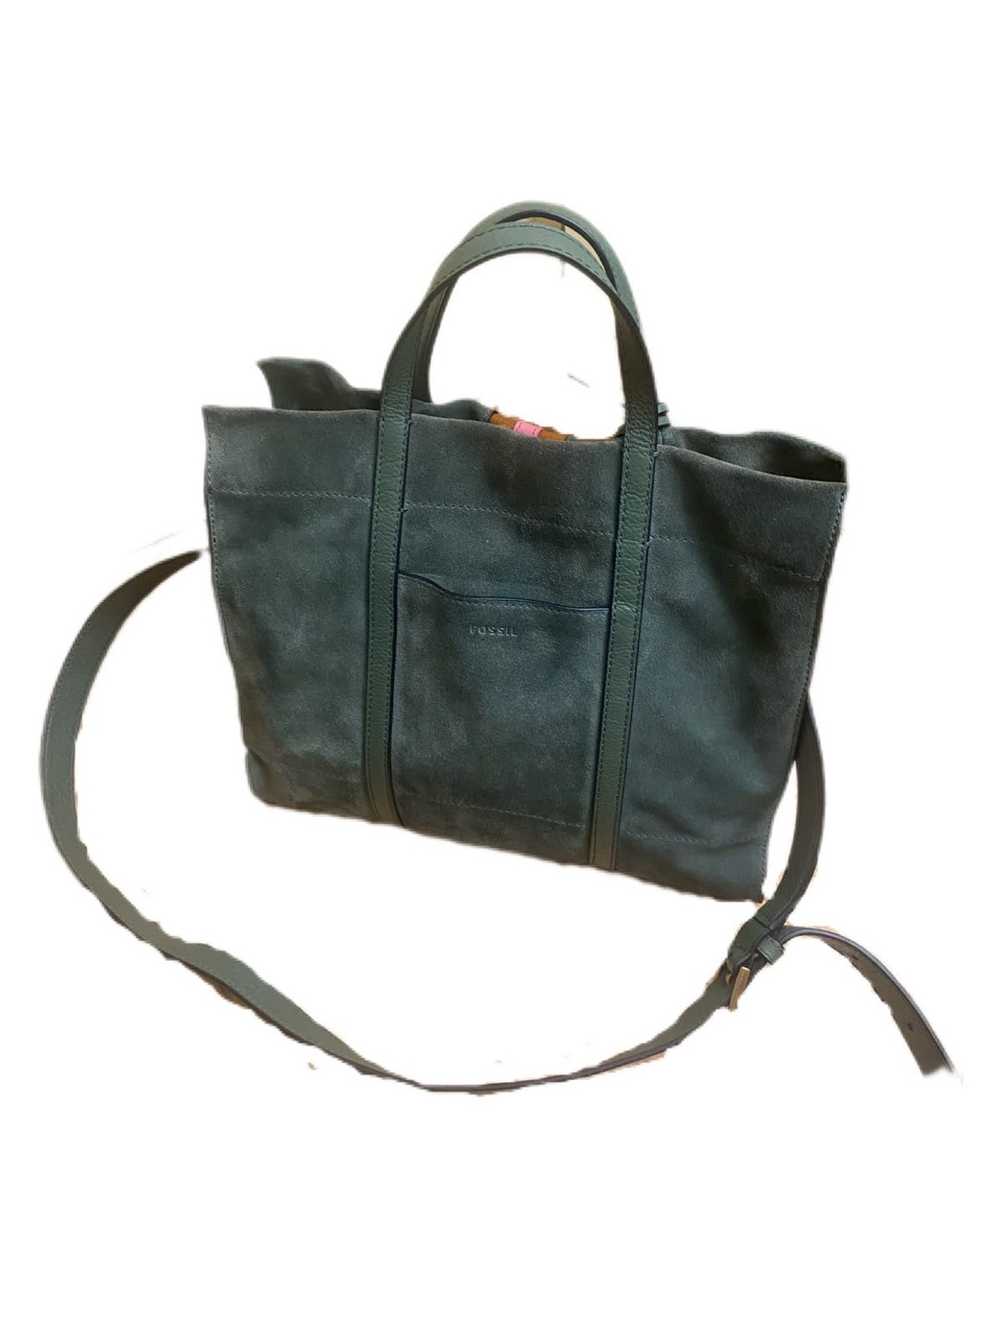 Fossil Green Suede Fossil Tote - image 2